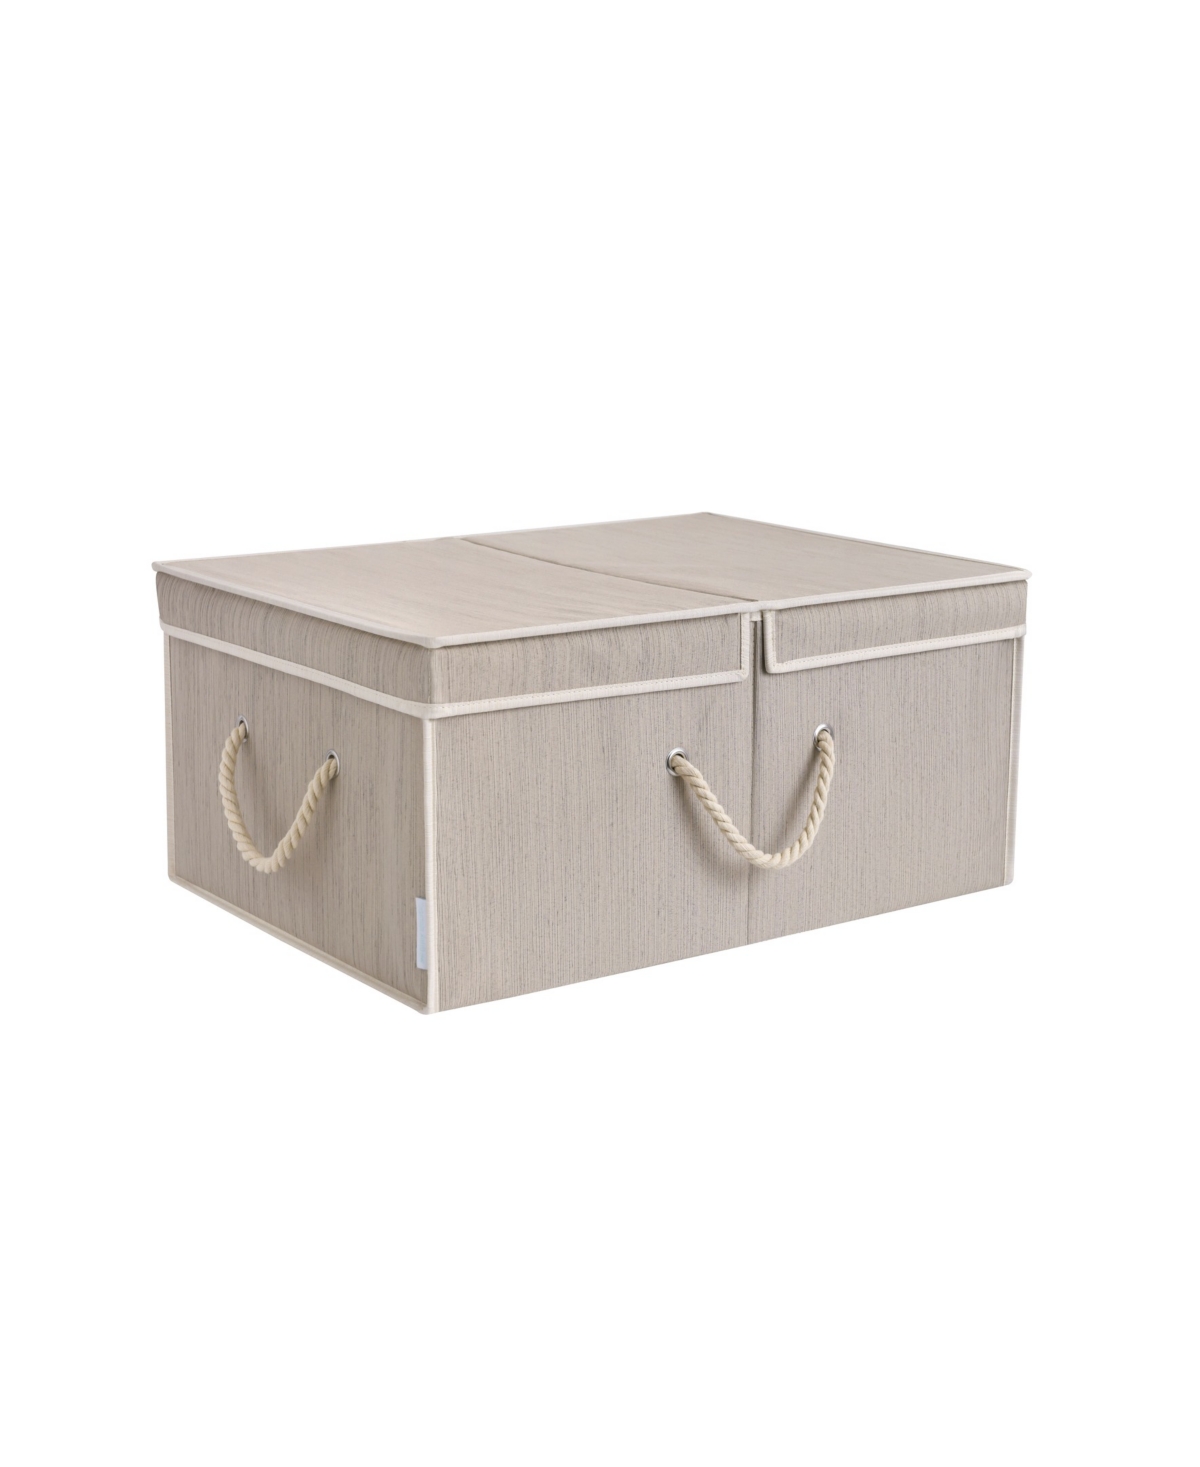 Wethinkstorage 65 Litre Collapsible Fabric Storage Bin With Double-open Lid And Cotton Rope Handles In Clay